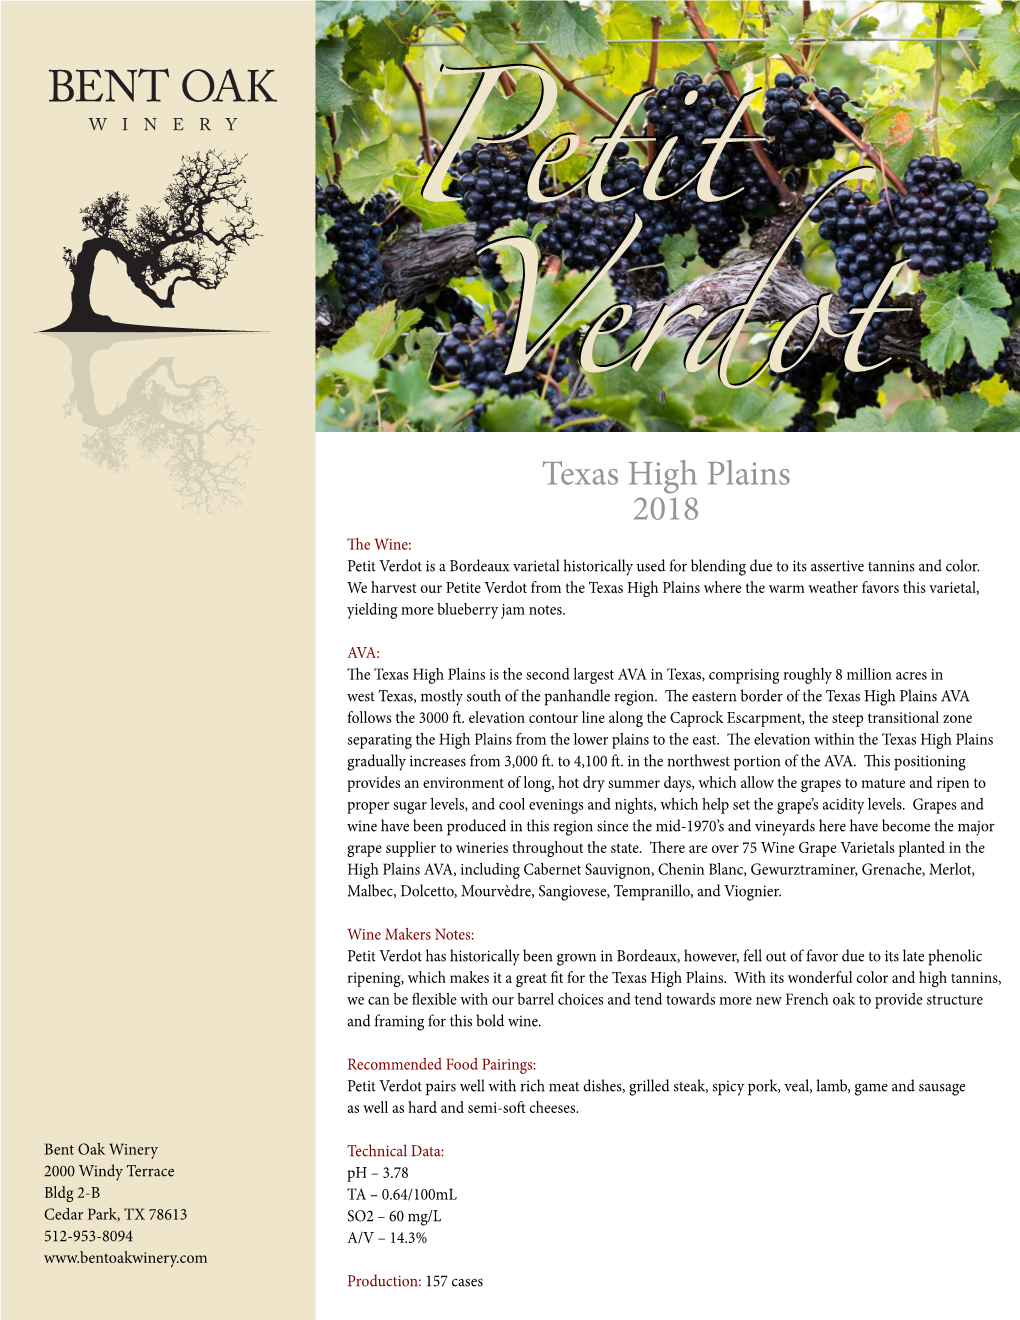 Texas High Plains 2018 E Wine: Petit Verdot Is a Bordeaux Varietal Historically Used for Blending Due to Its Assertive Tannins and Color